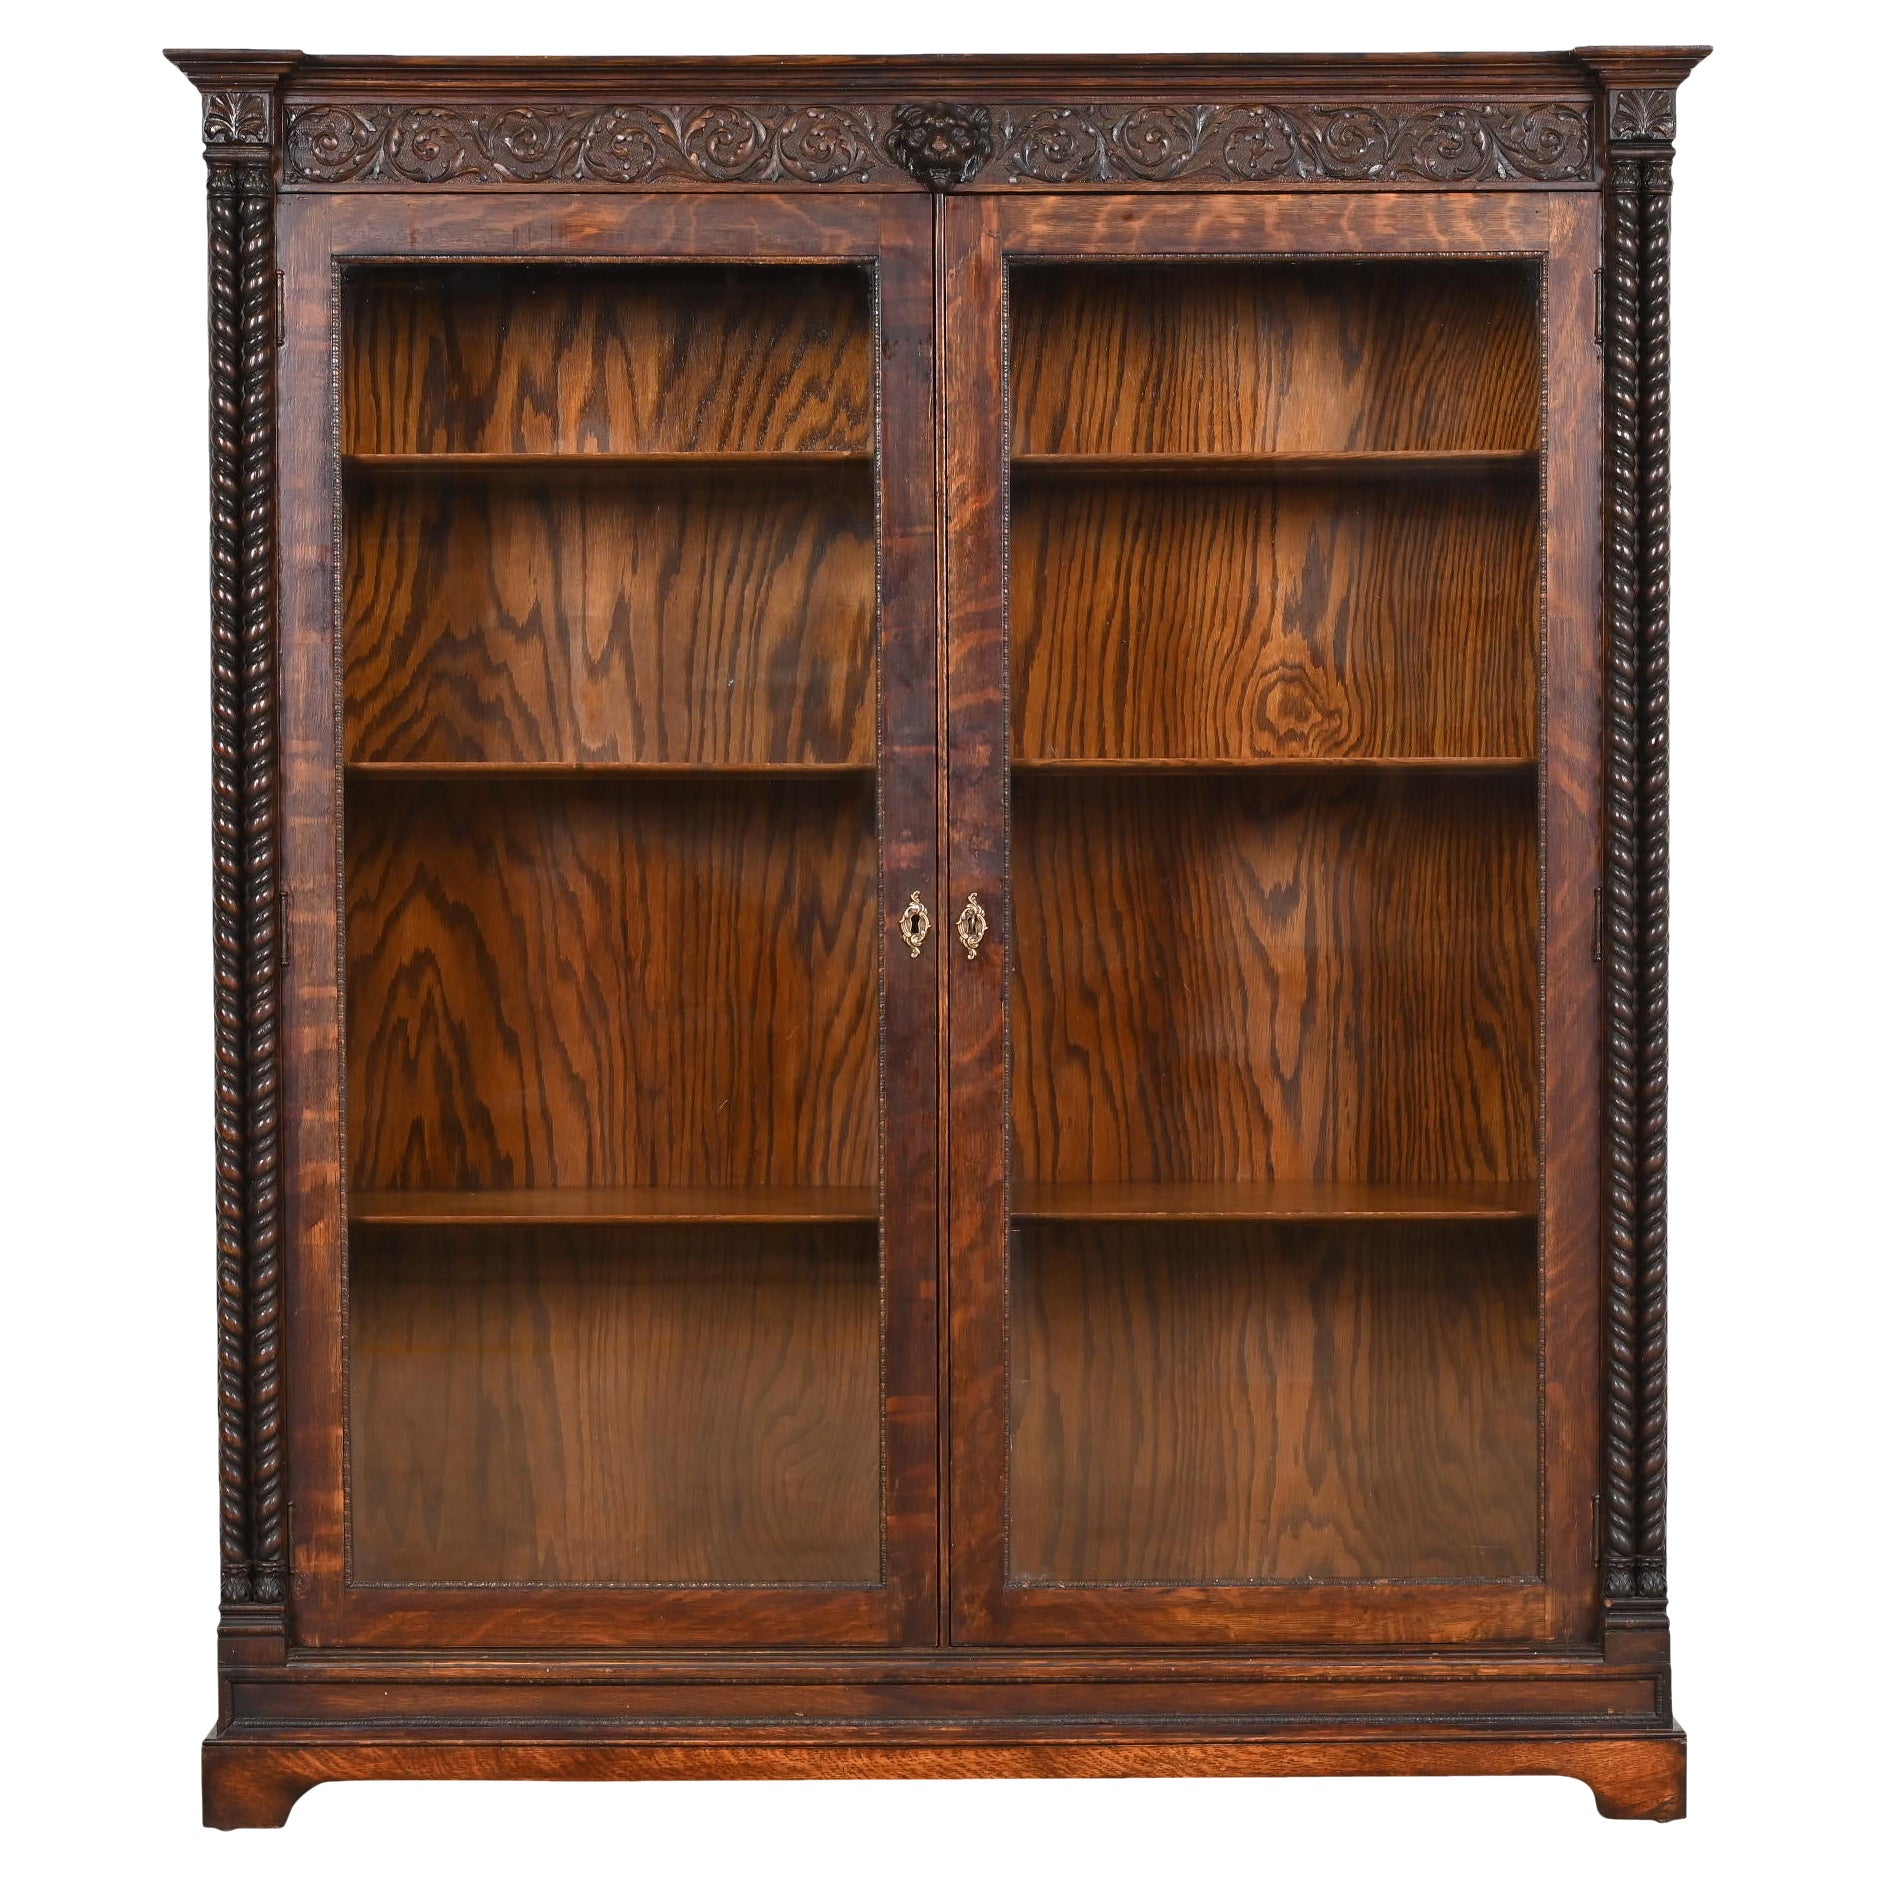 R.J. Horner Style American Empire Carved Oak Double Bookcase, Circa 1890